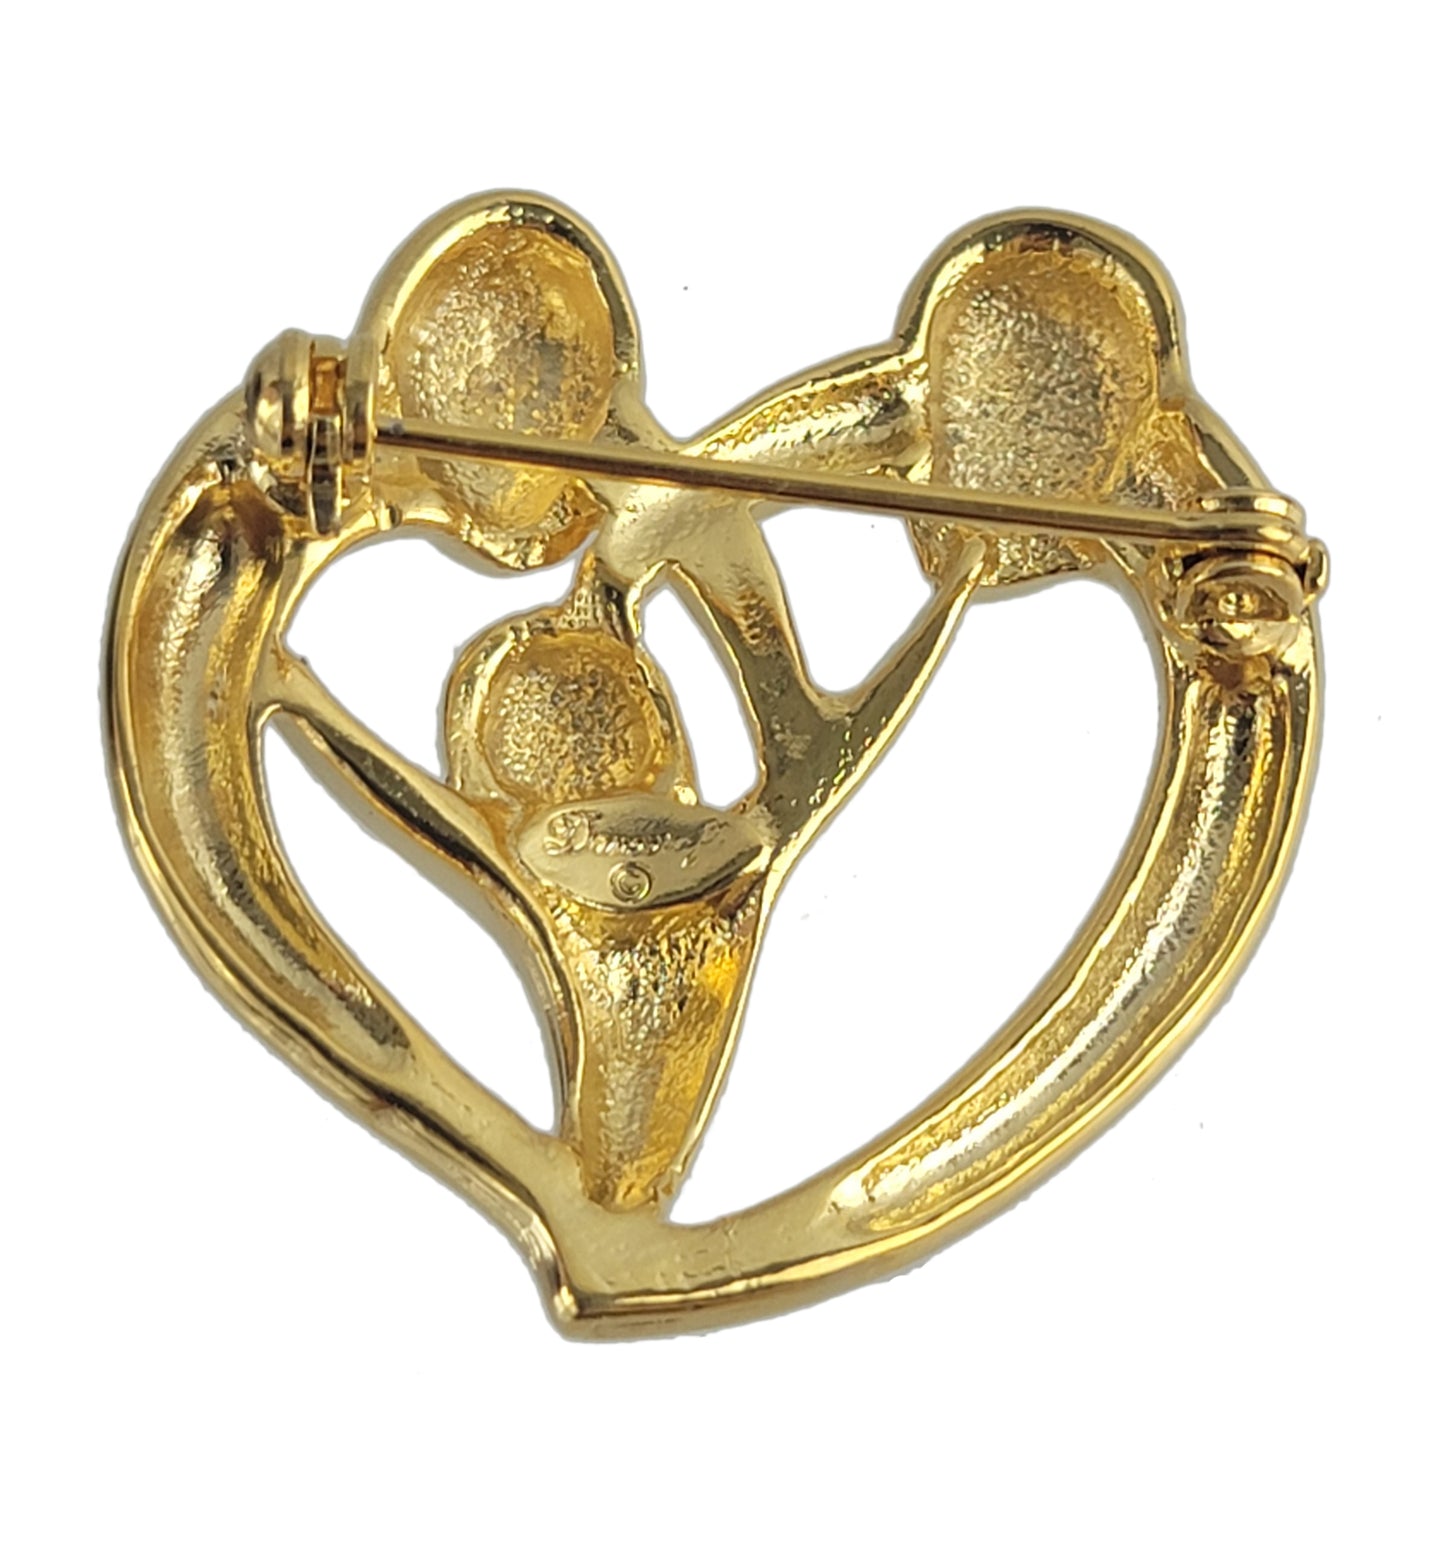 Danecraft Love Family Parents and Child Heart Pin Brooch Gold Tone NWOT 1 1/2"